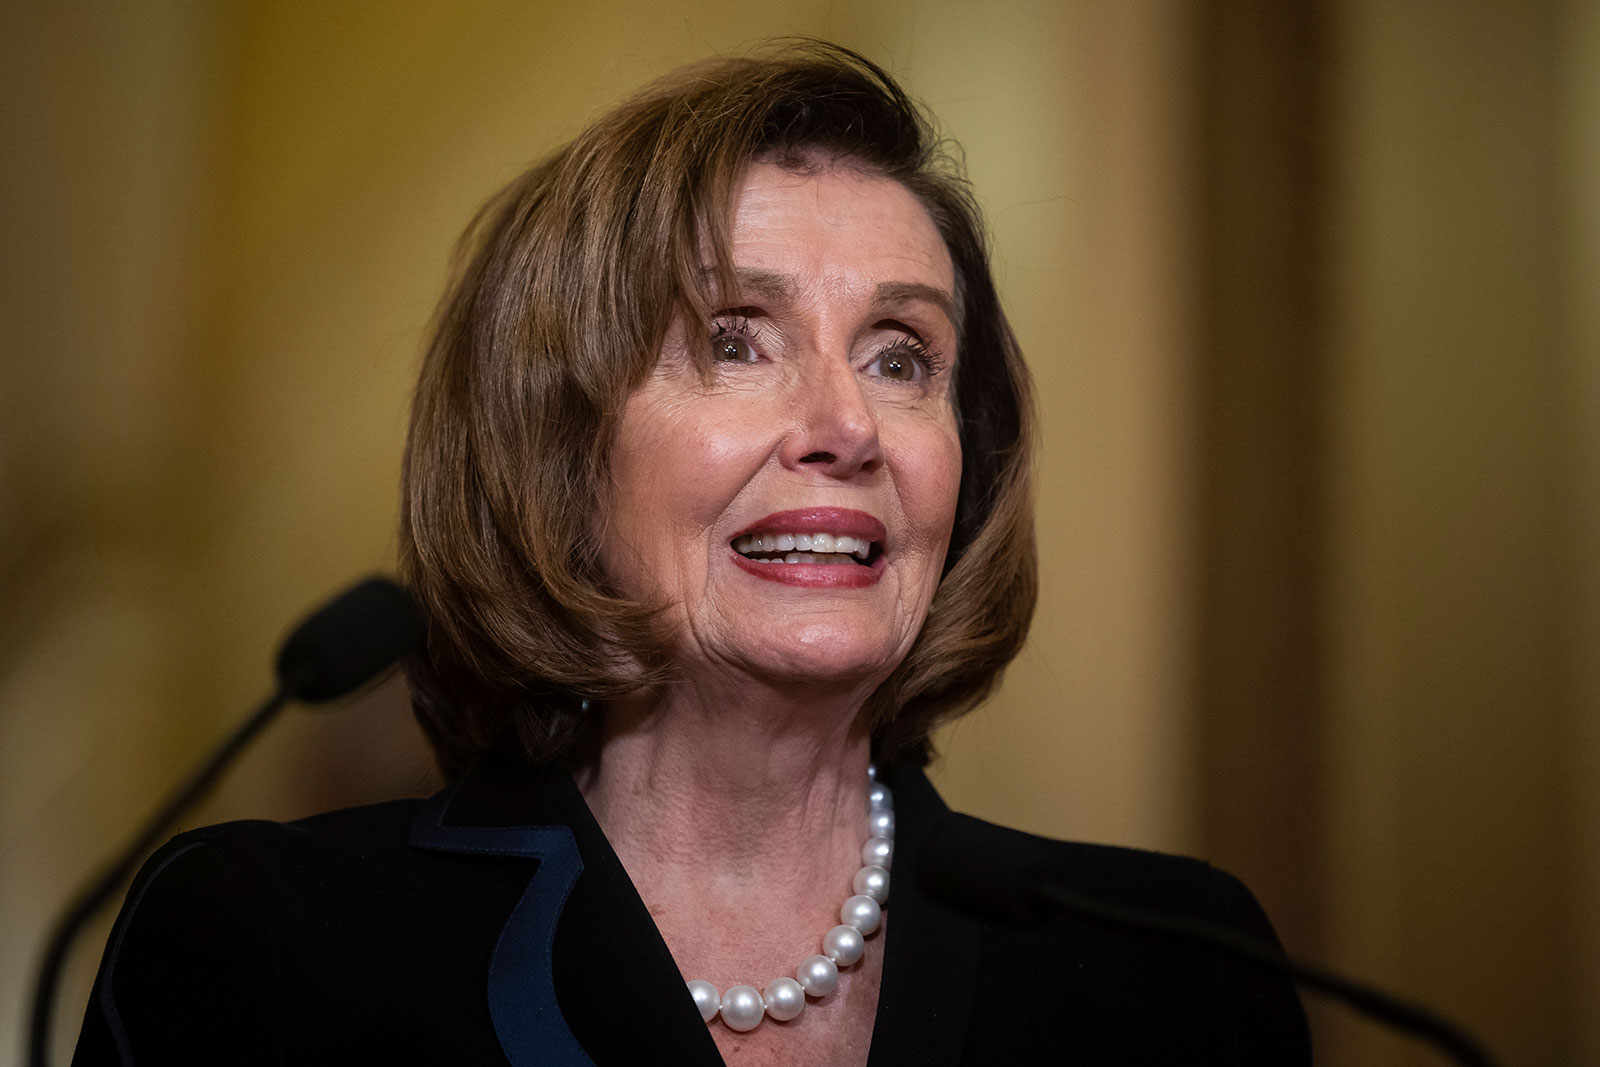 House Speaker Nancy Pelosi wins reelection in California’s 11th Congressional District